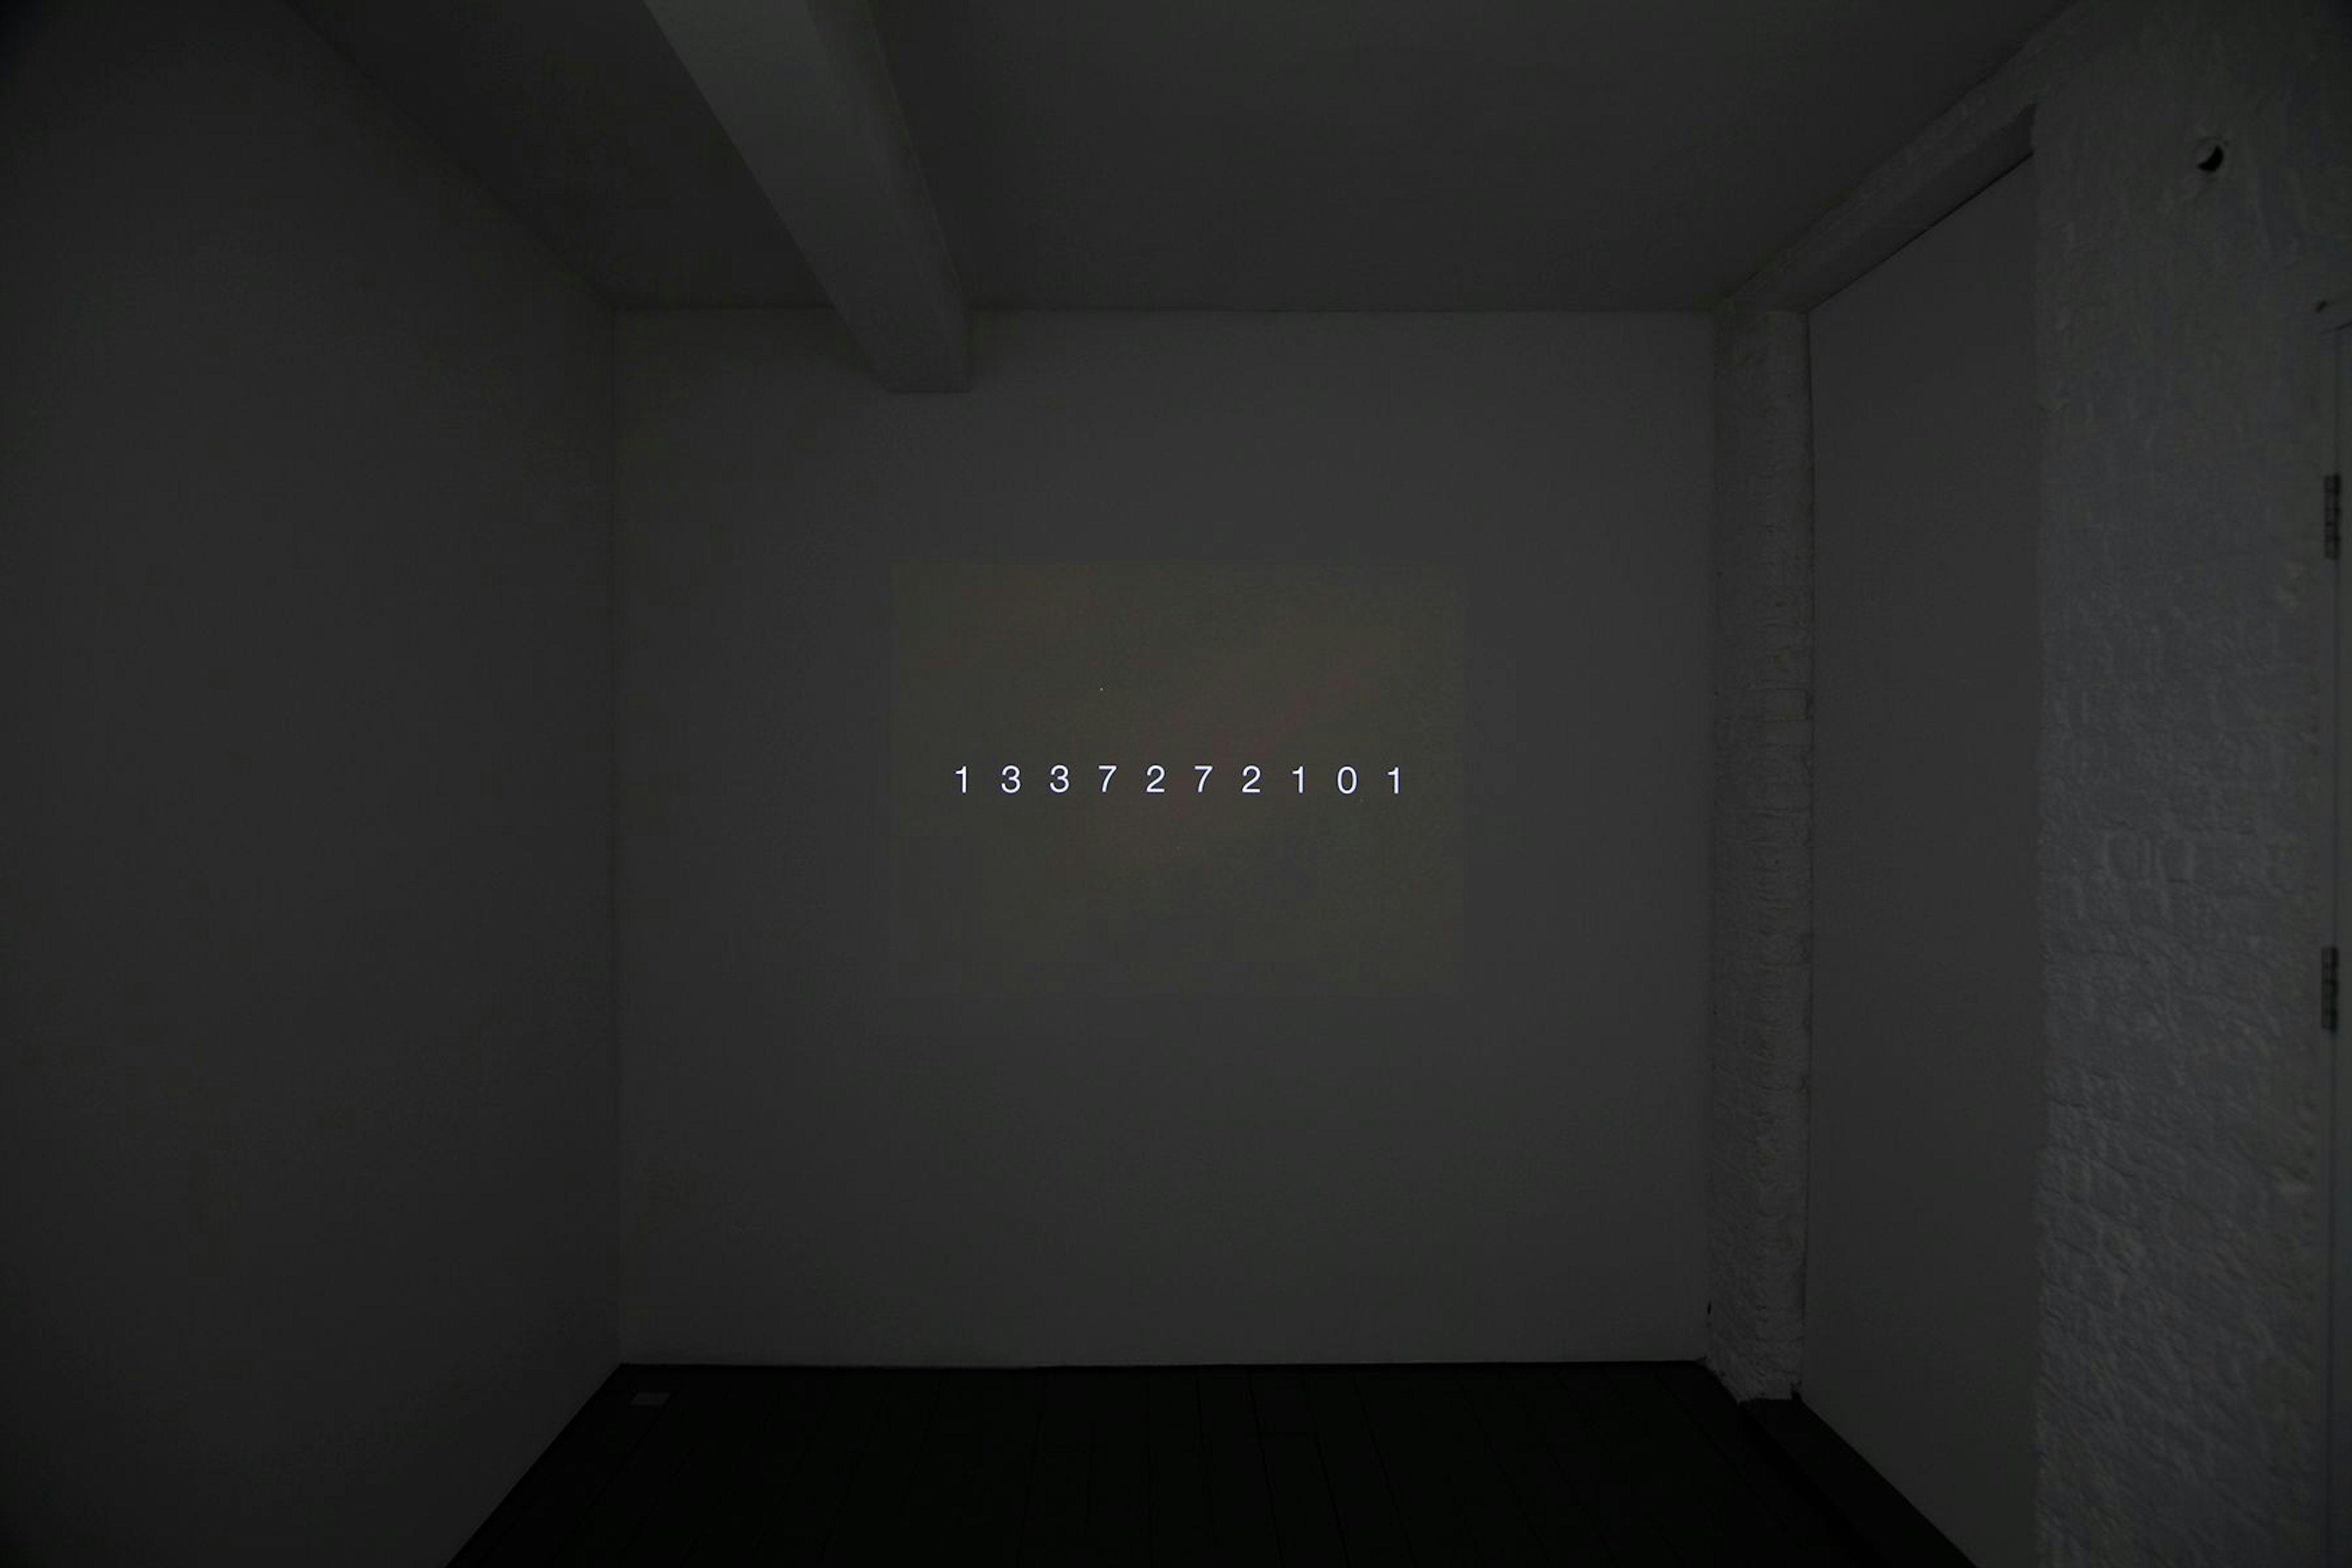 Installation view of Unix Time, 2012